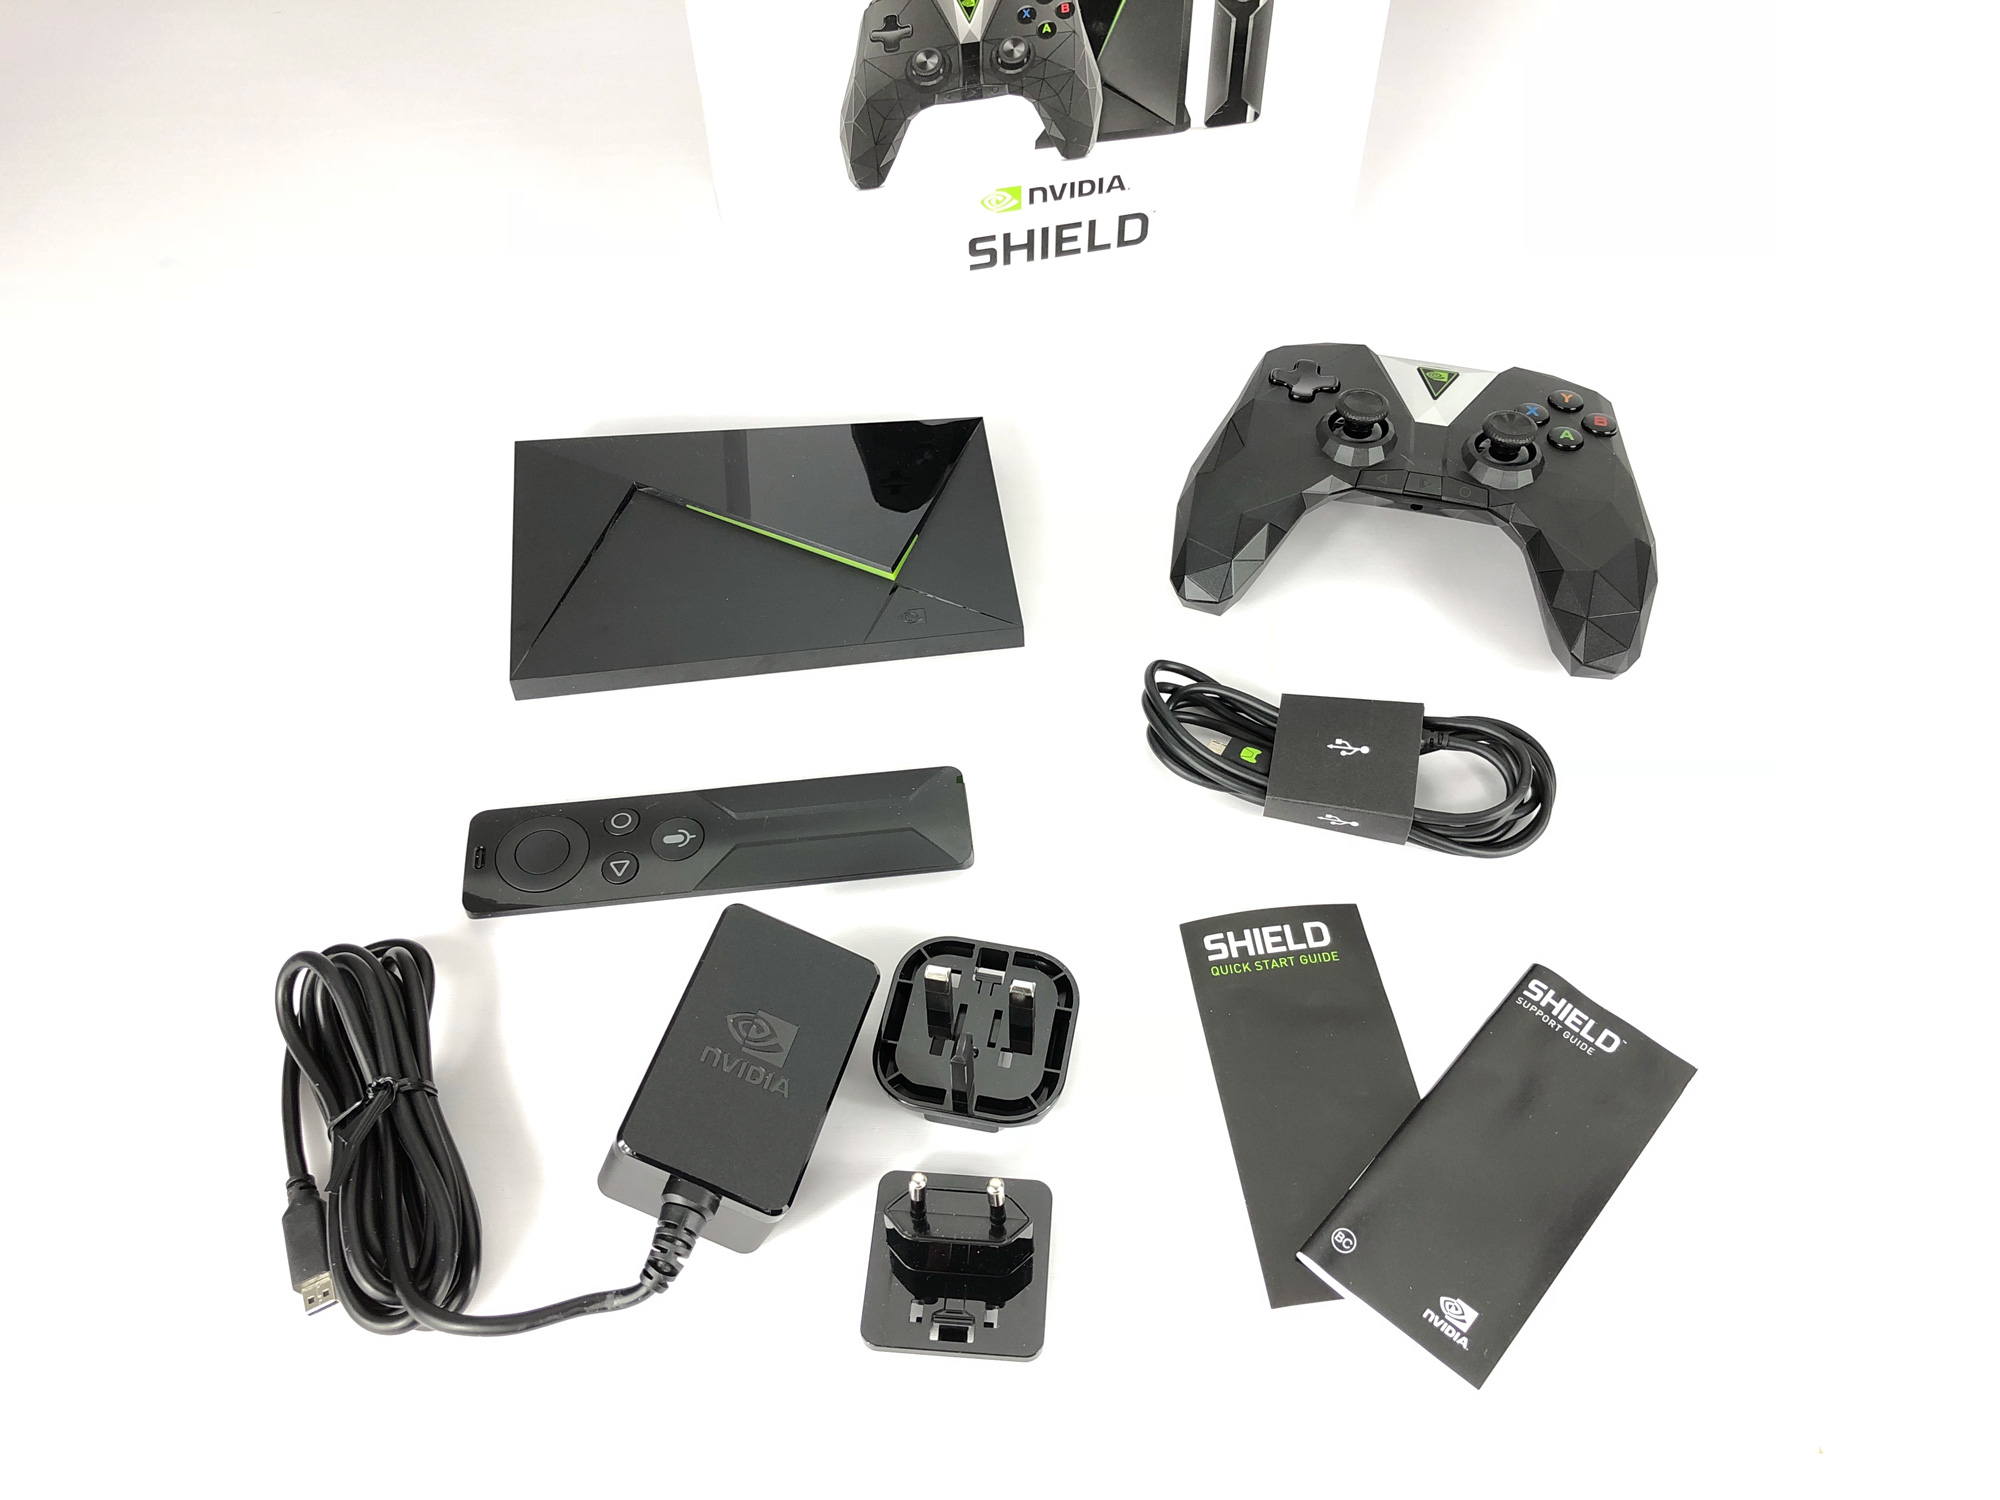 Hardware-Test: Nvidia Shield TV 2017 - Lieferumfang